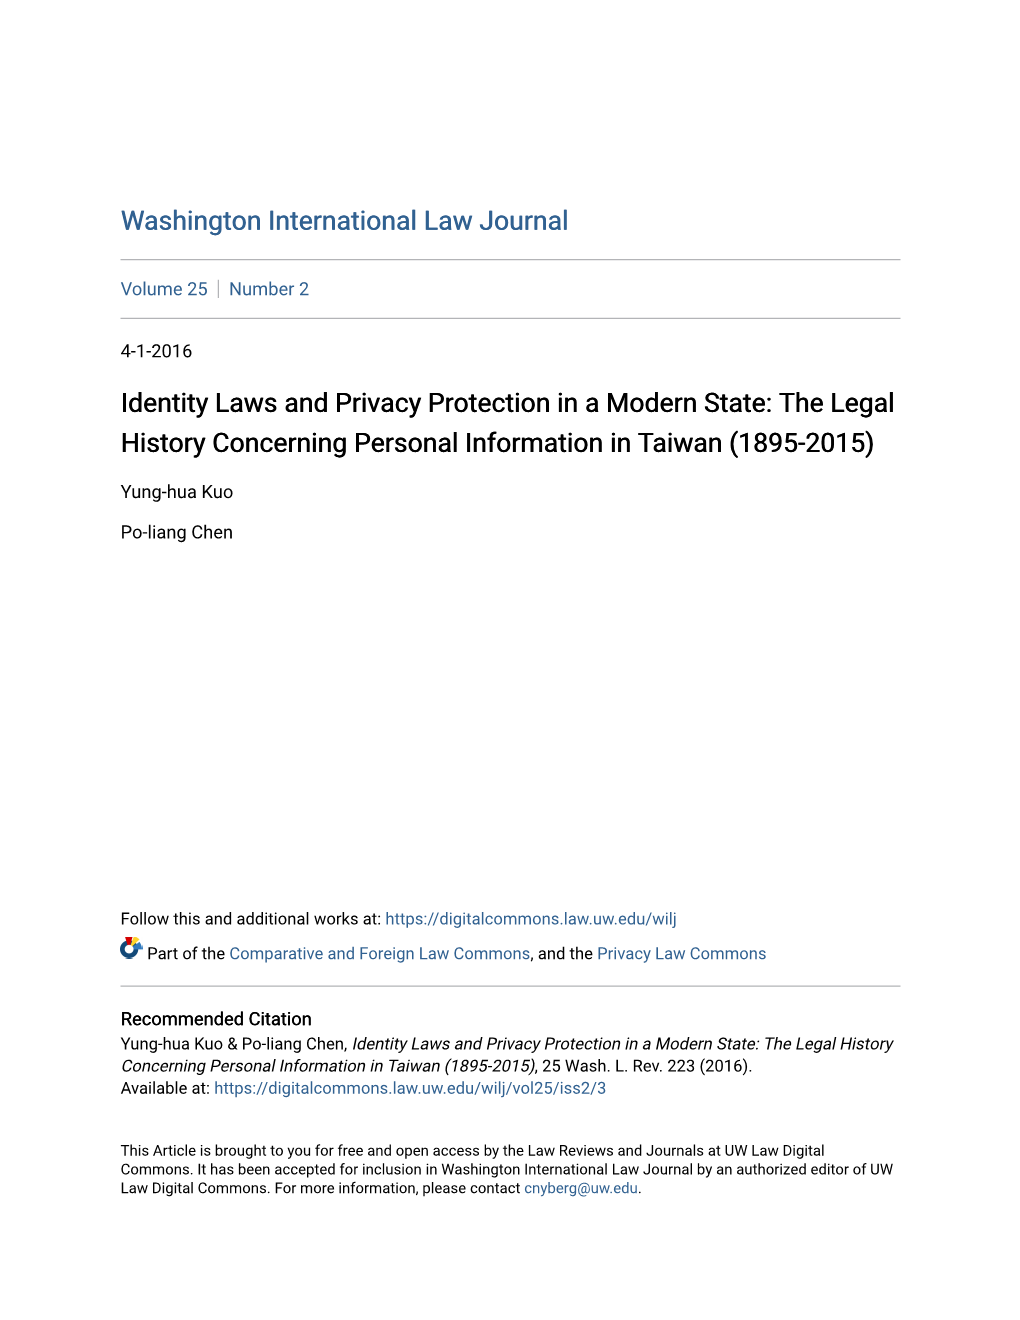 Identity Laws and Privacy Protection in a Modern State: the Legal History Concerning Personal Information in Taiwan (1895-2015)